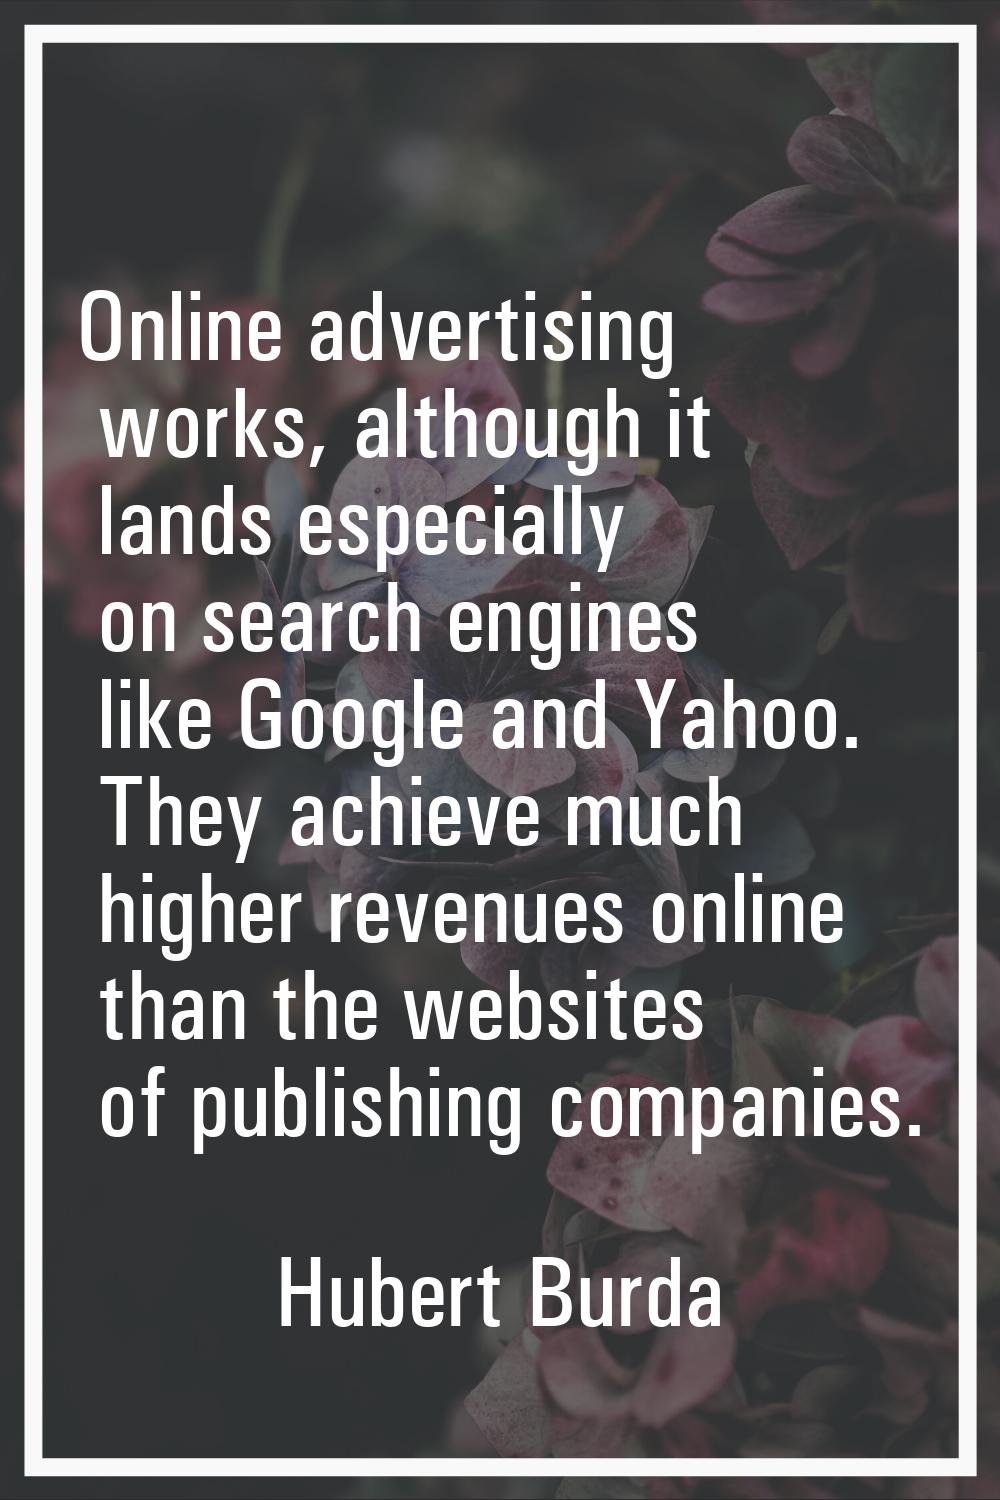 Online advertising works, although it lands especially on search engines like Google and Yahoo. The